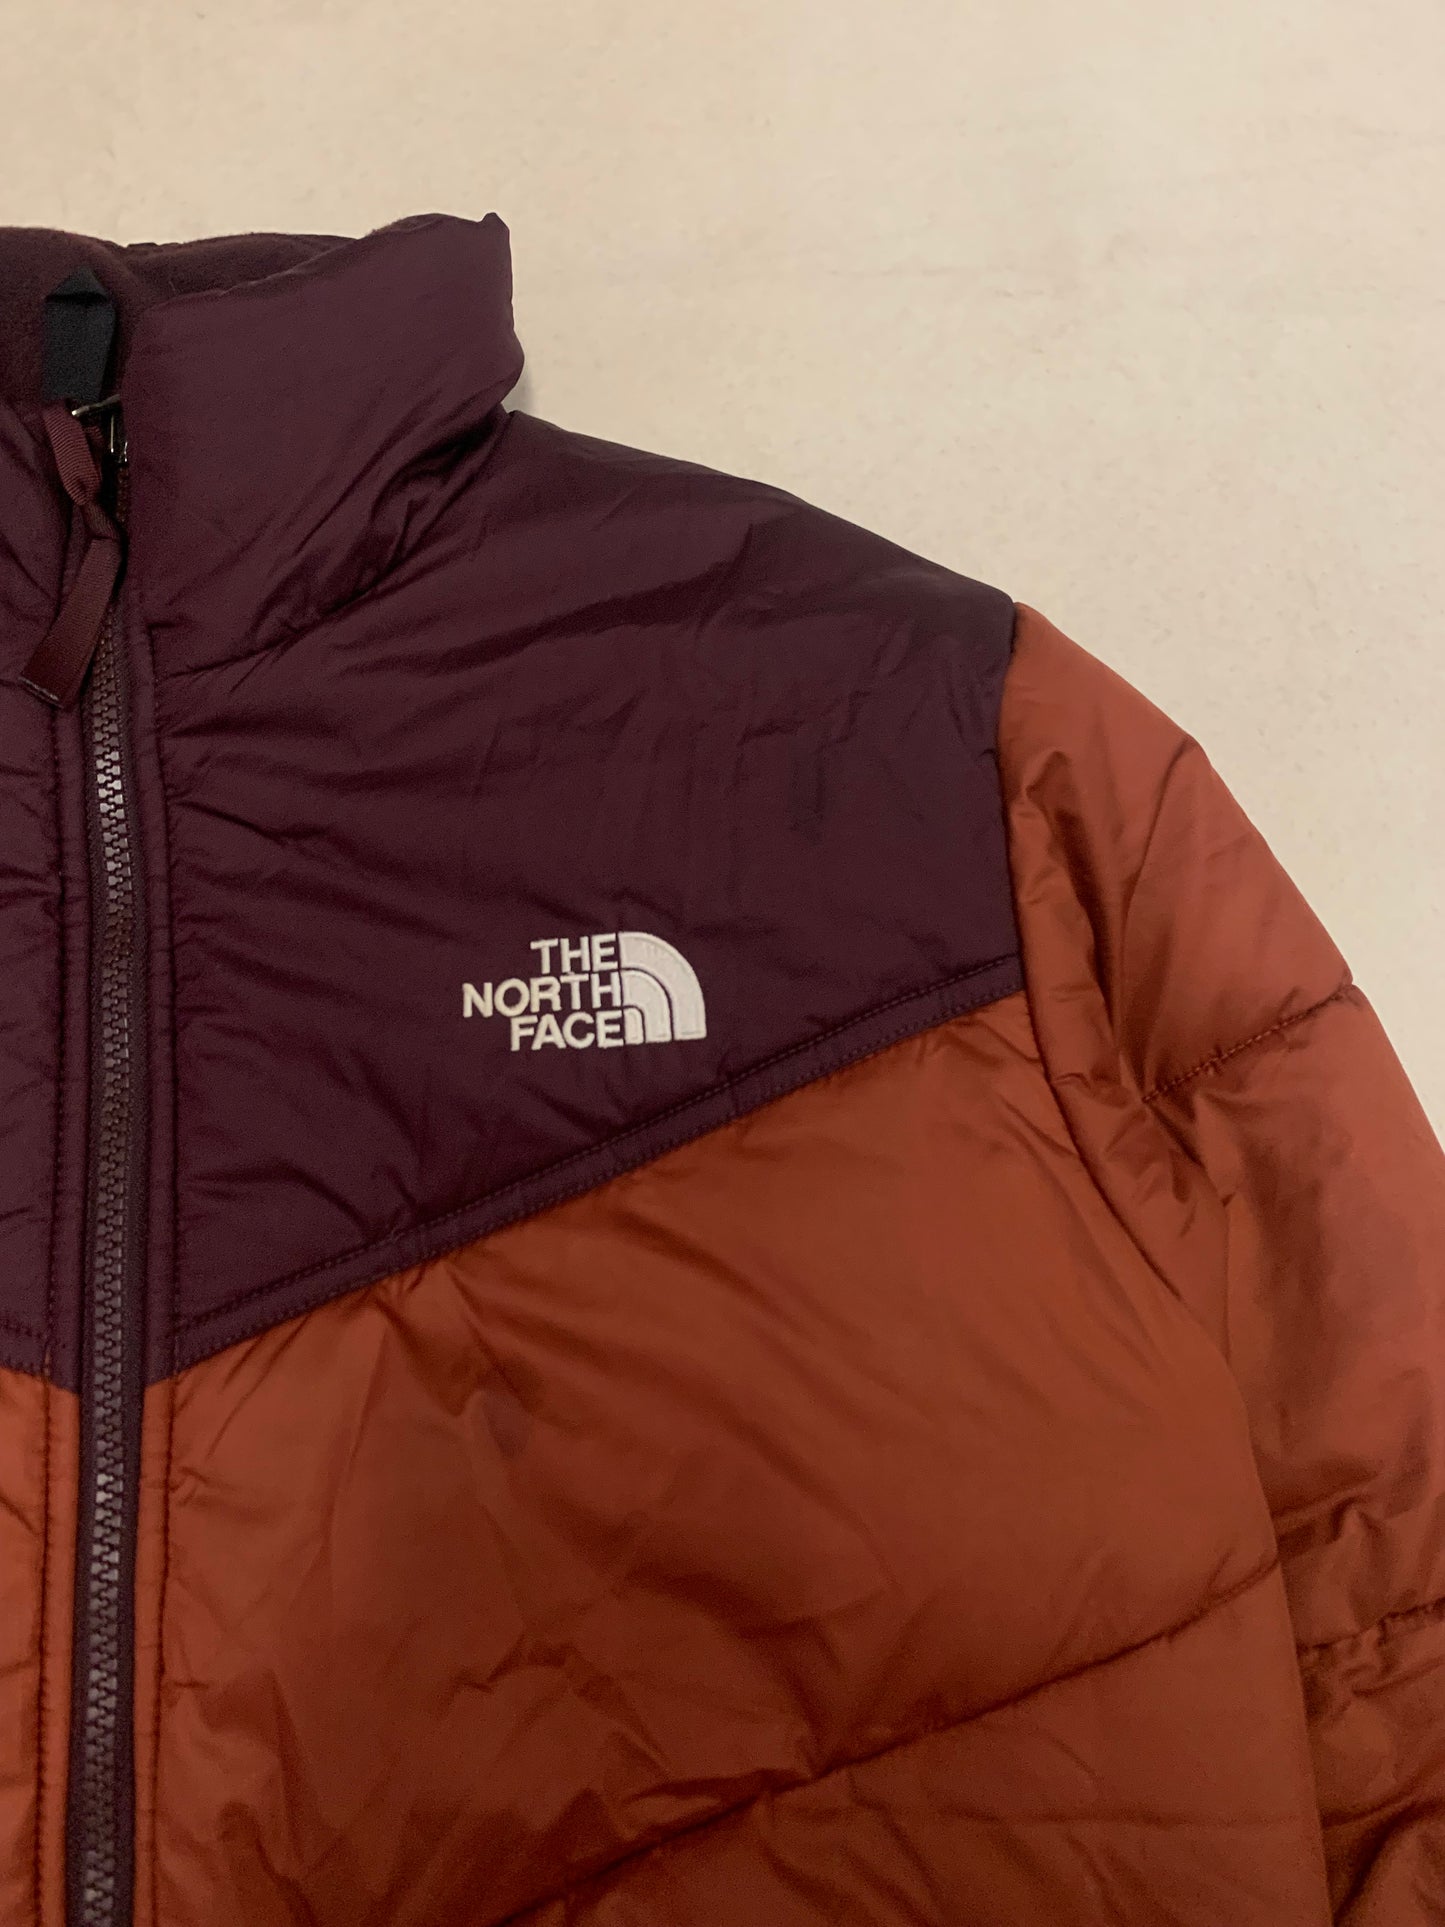 The North Face Vintage Puffer Jacket - S